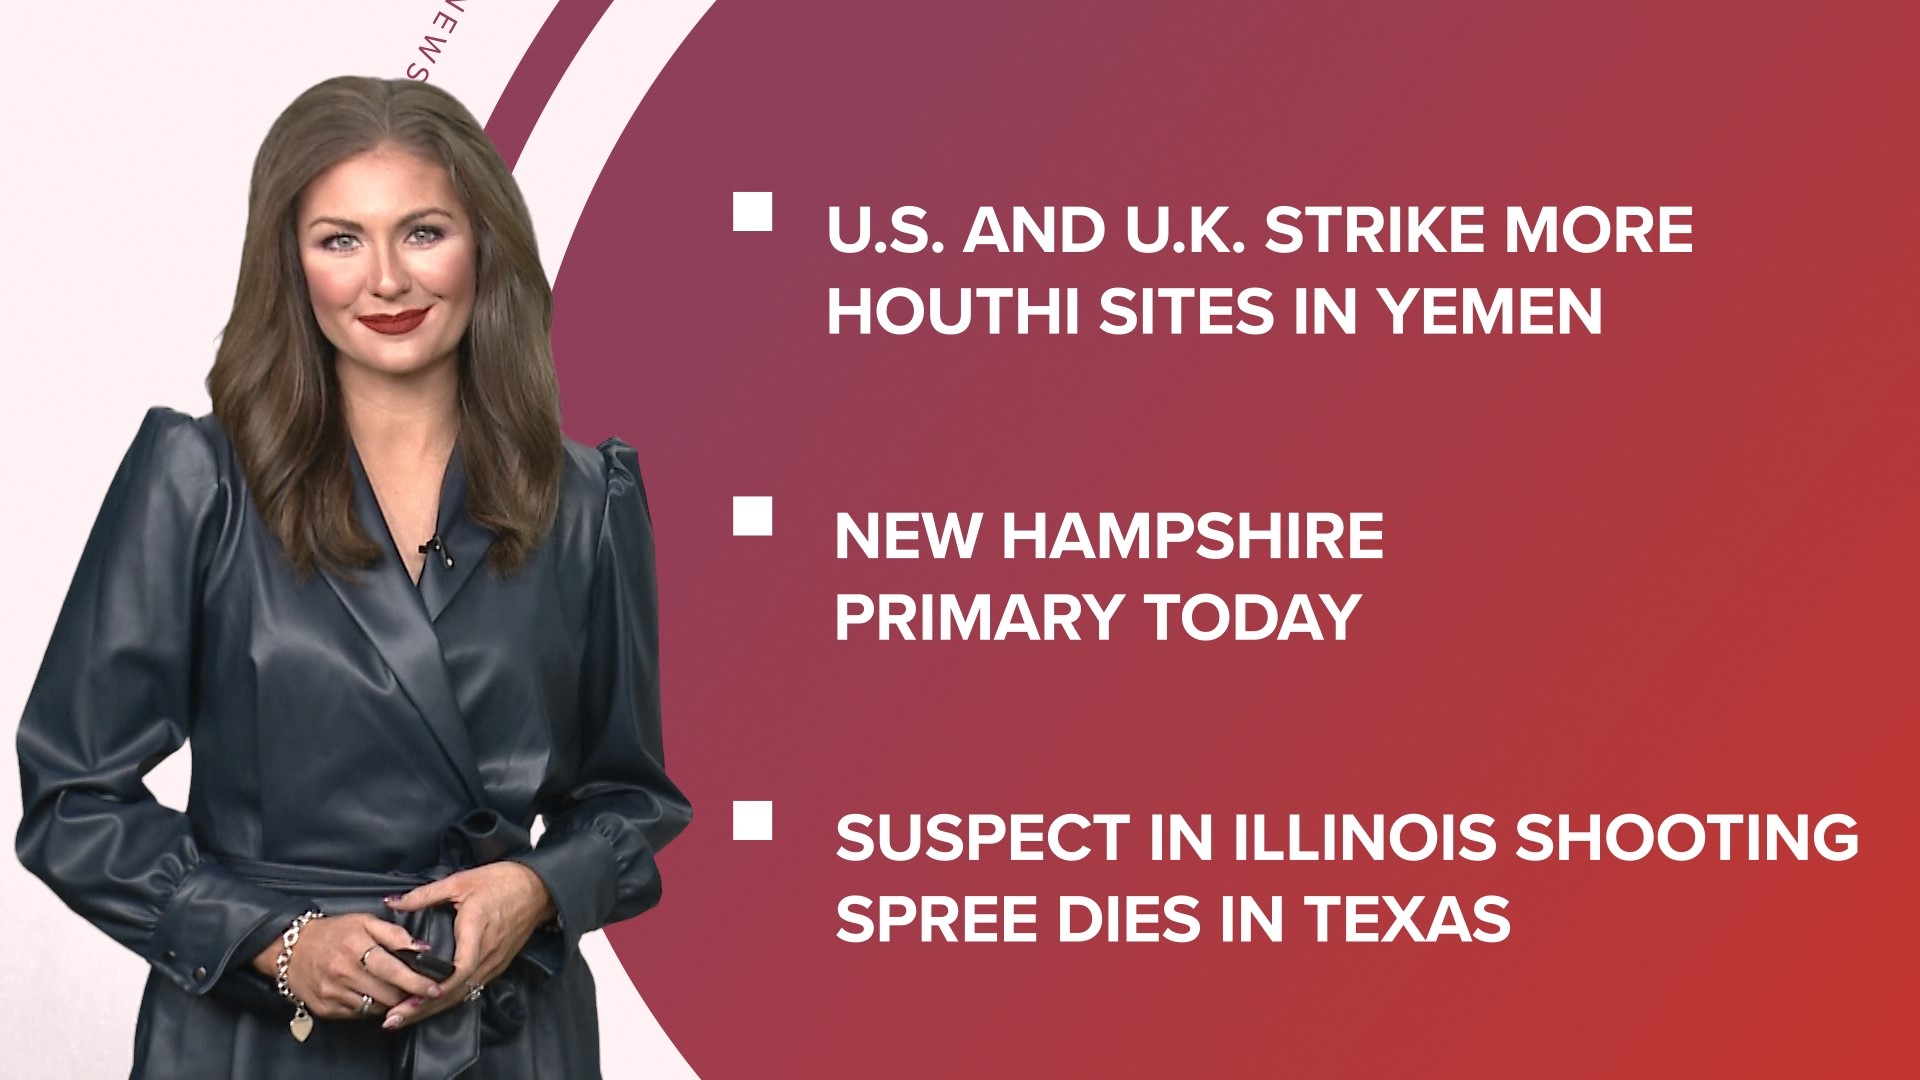 A look at what is happening in the news from more U.S. airstrikes in Yemen to primary day in New Hampshire and looking back at the life of Dexter Scott King,